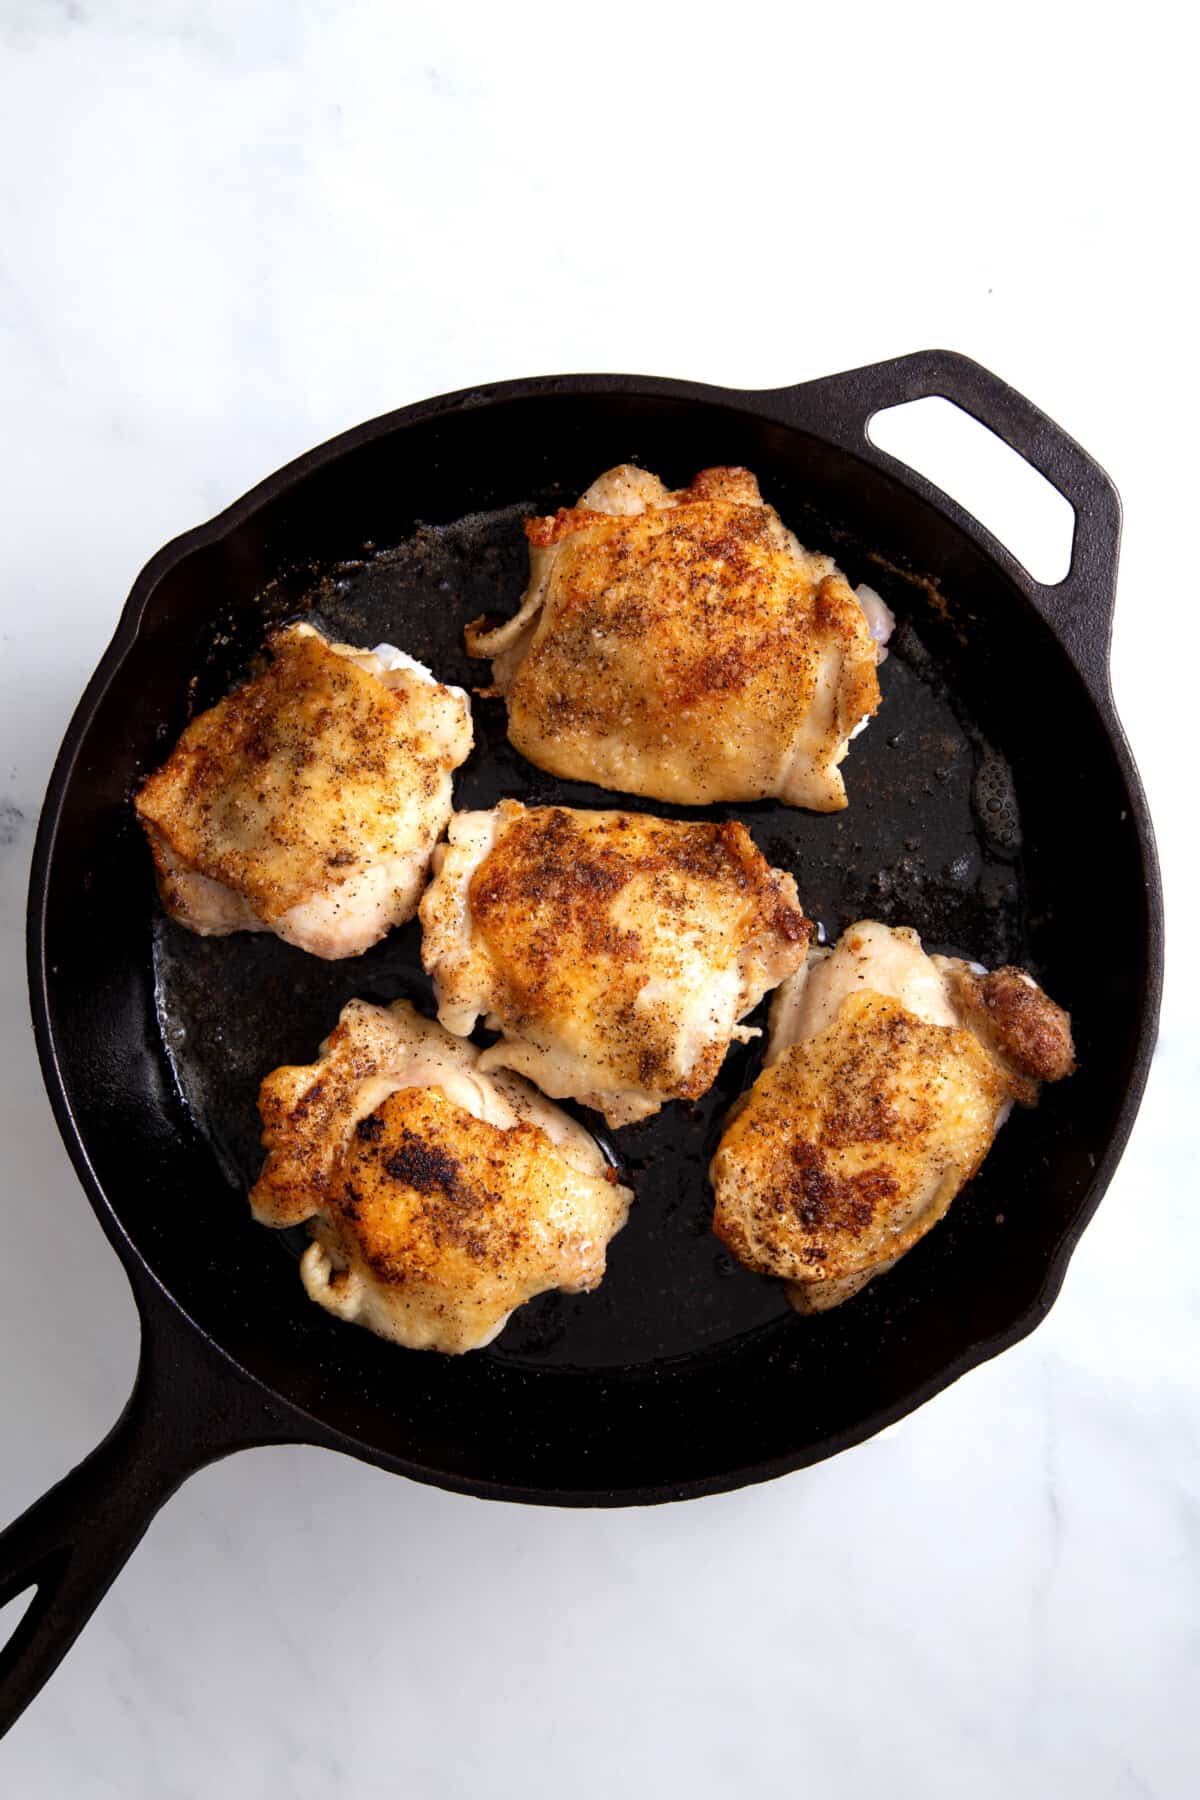 step 2 to make cast iron chicken thighs, cook chicken thighs on a hot cast iron skillet pan.